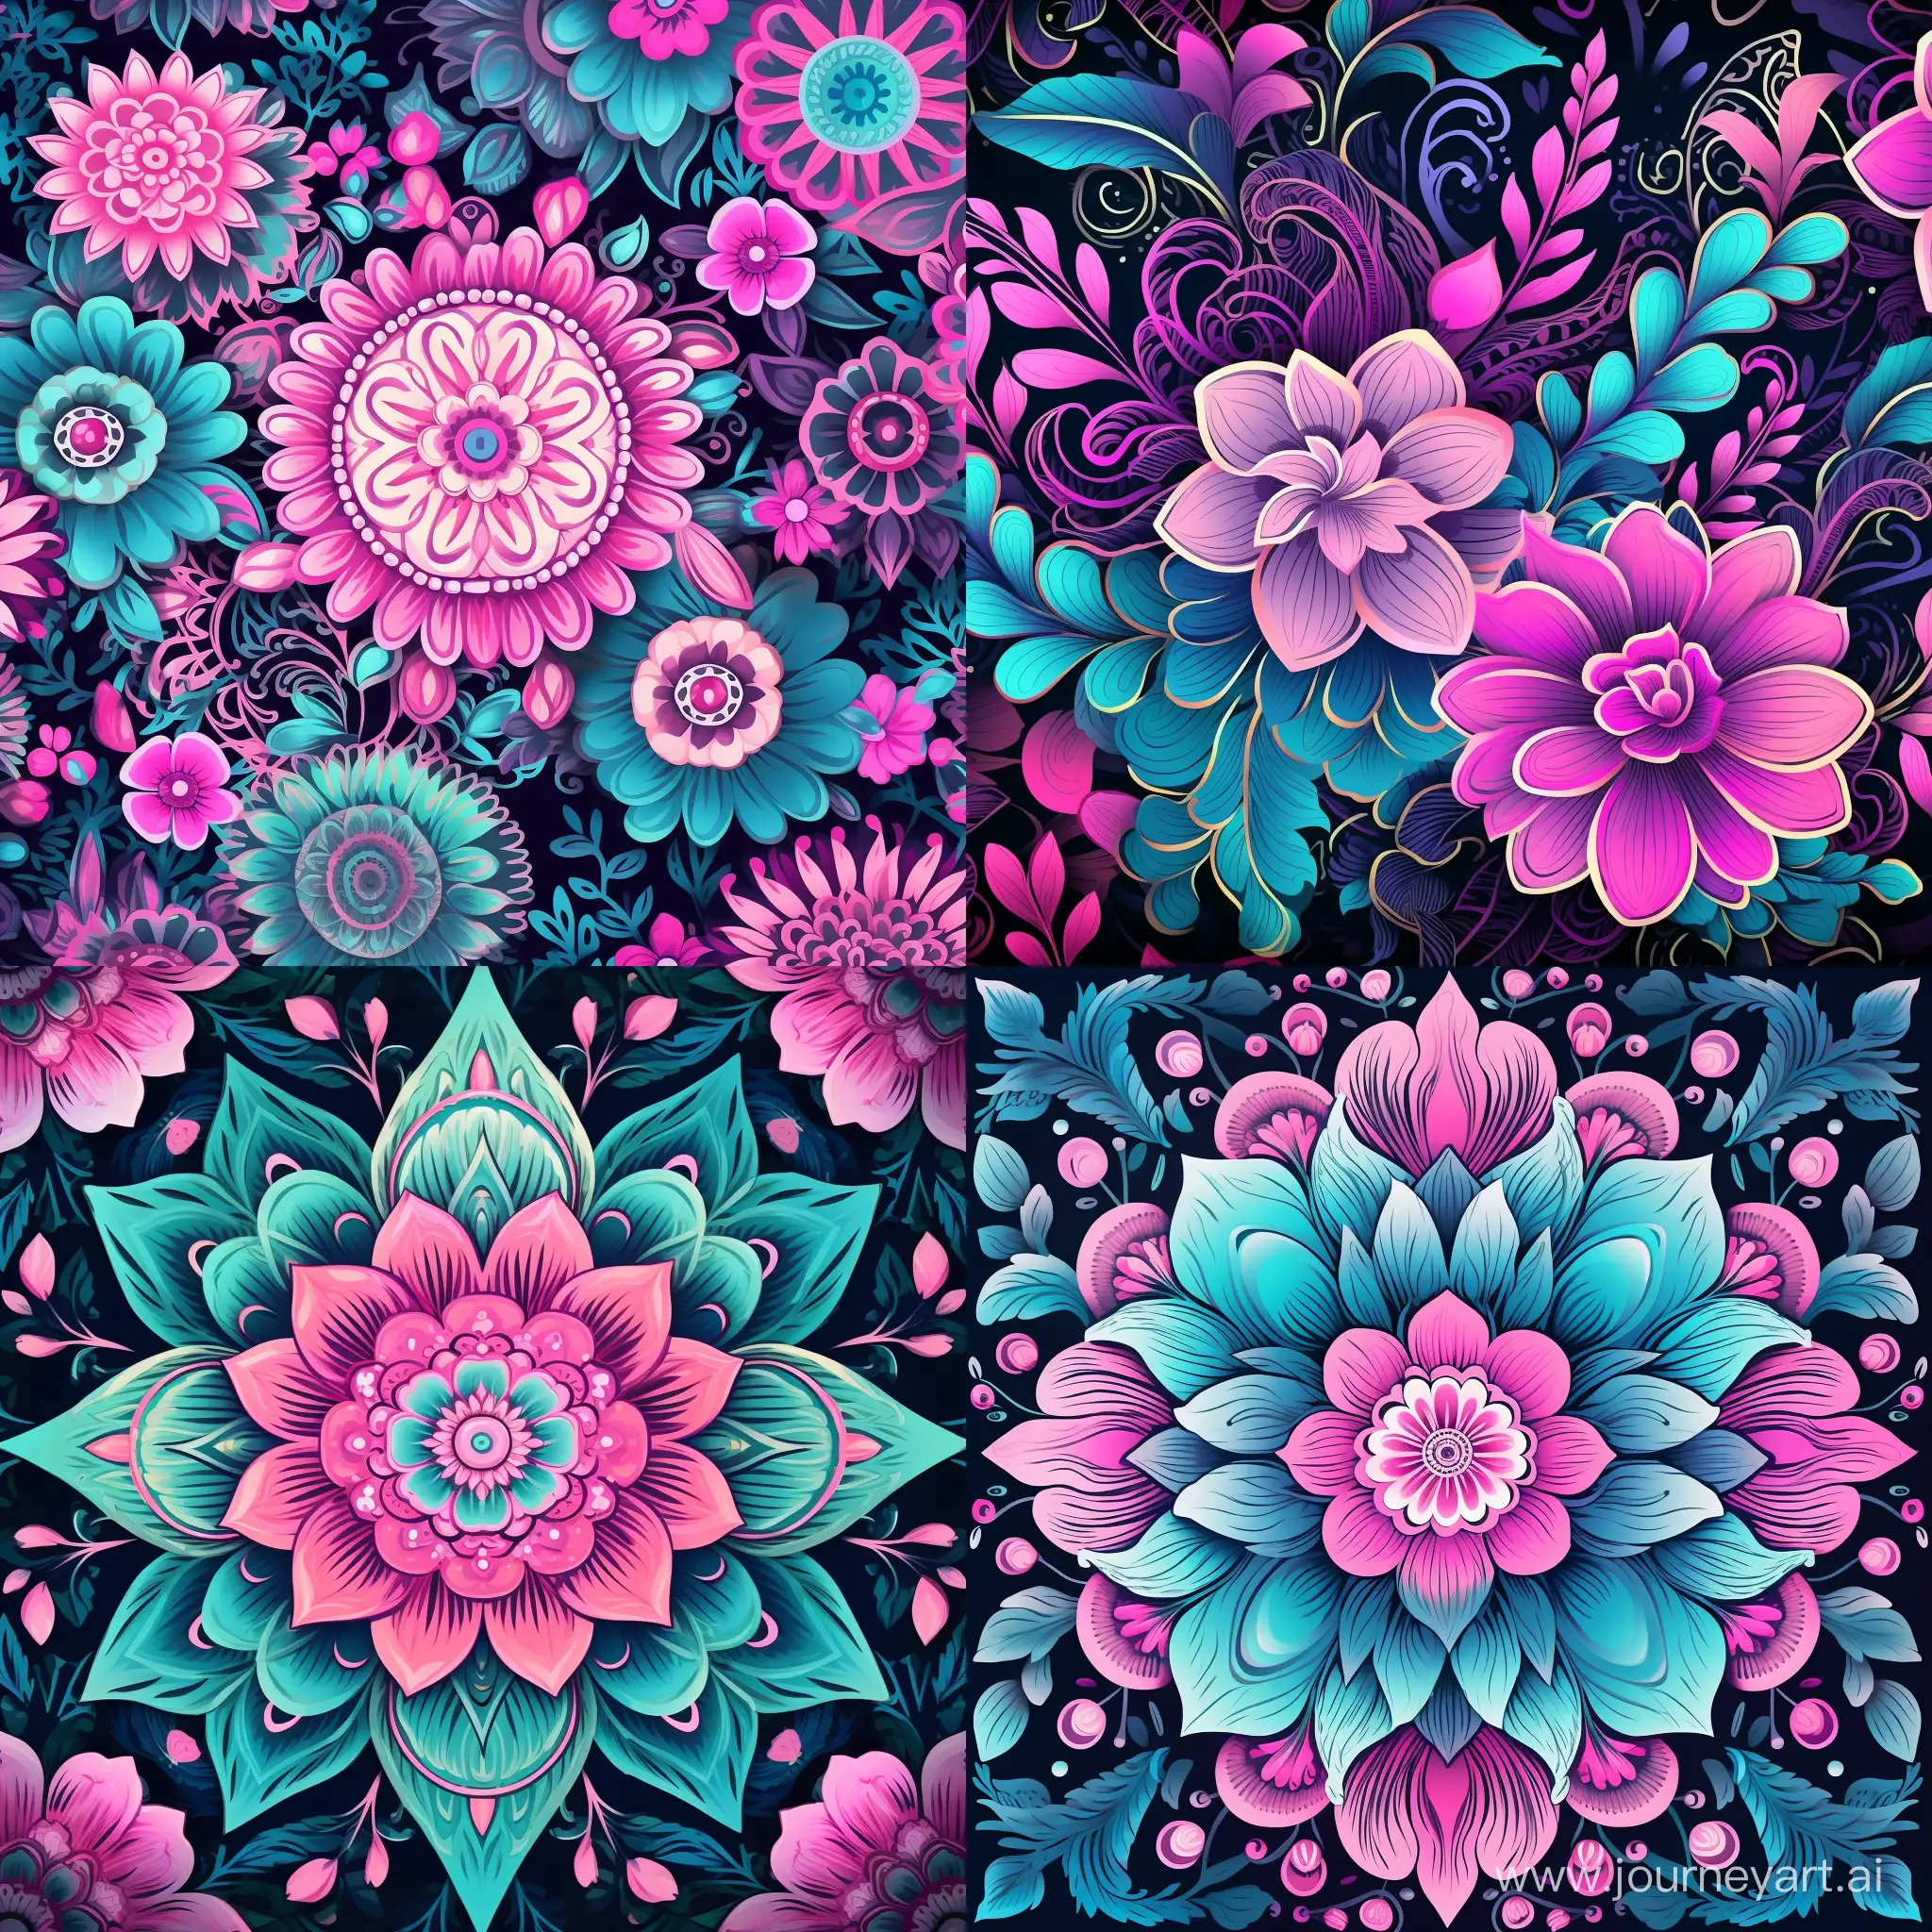 A background for the computer that includes flowers, mandalas, in shades of turquoise-pink-light pink, on a dark background